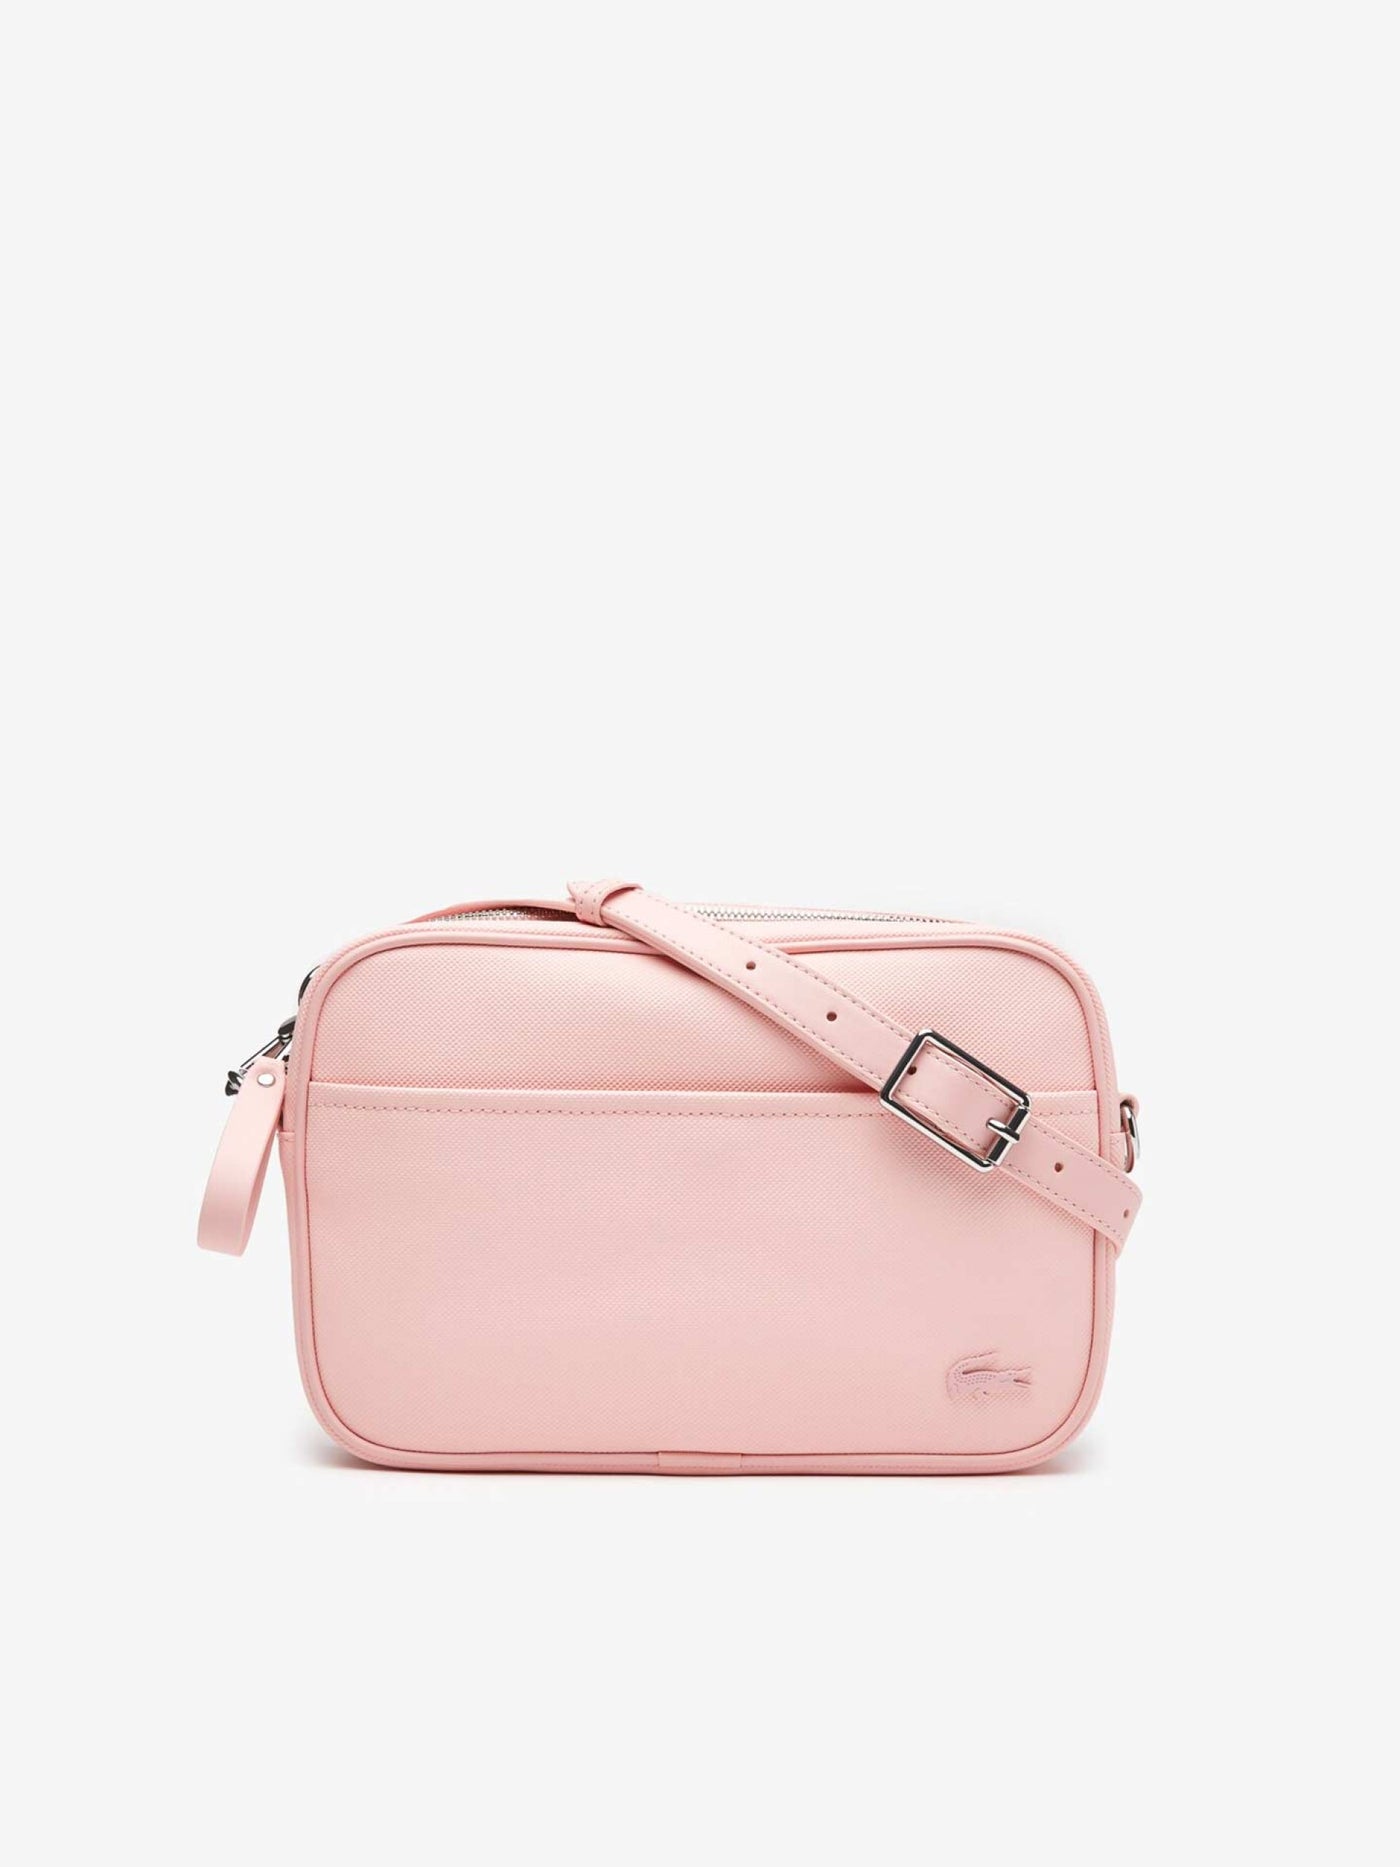 Sacoche Lacoste Rose